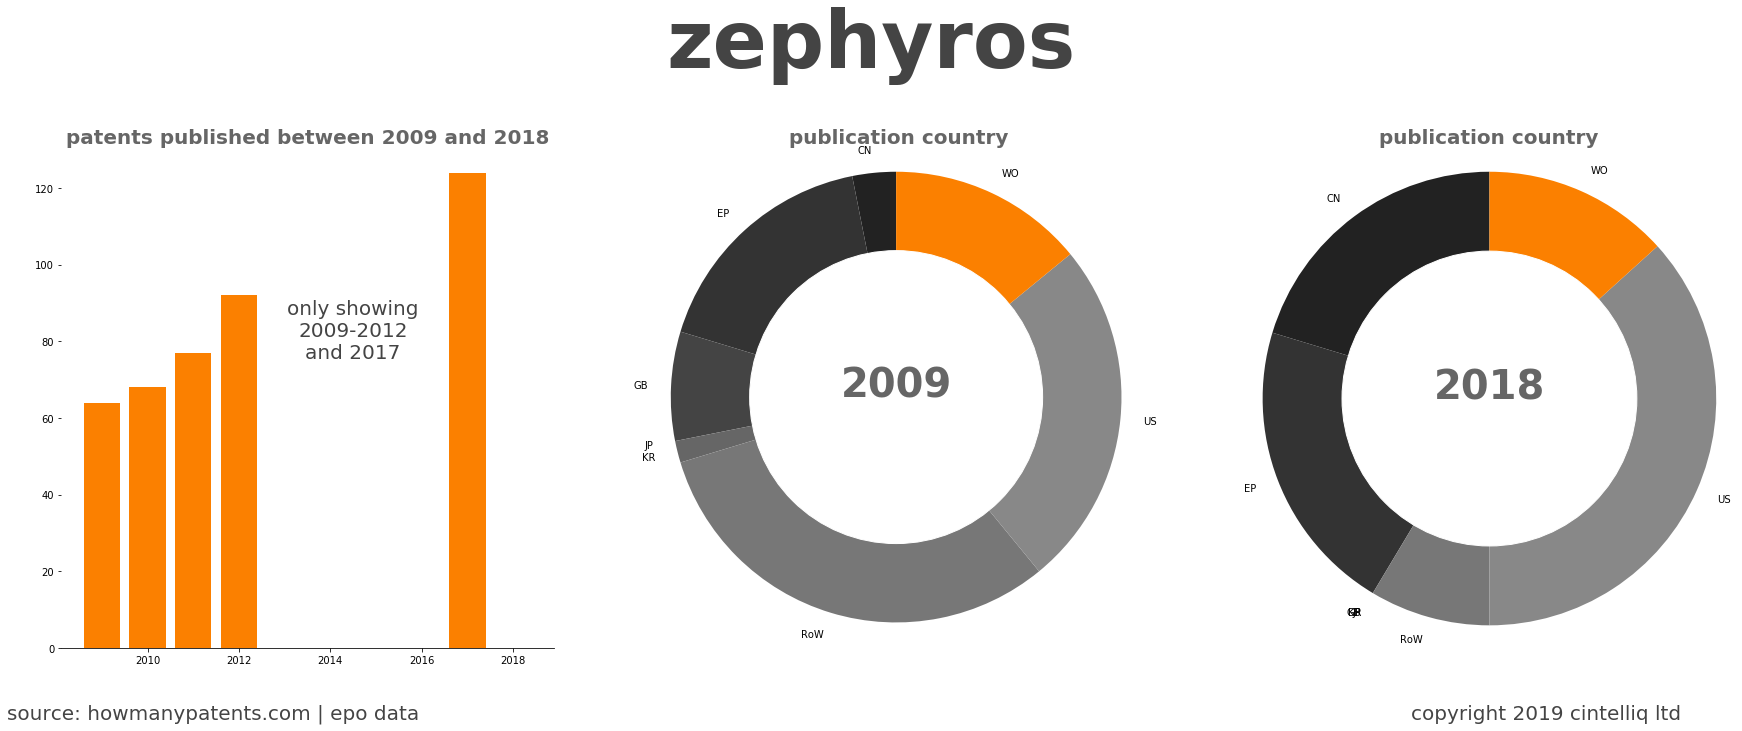 summary of patents for Zephyros